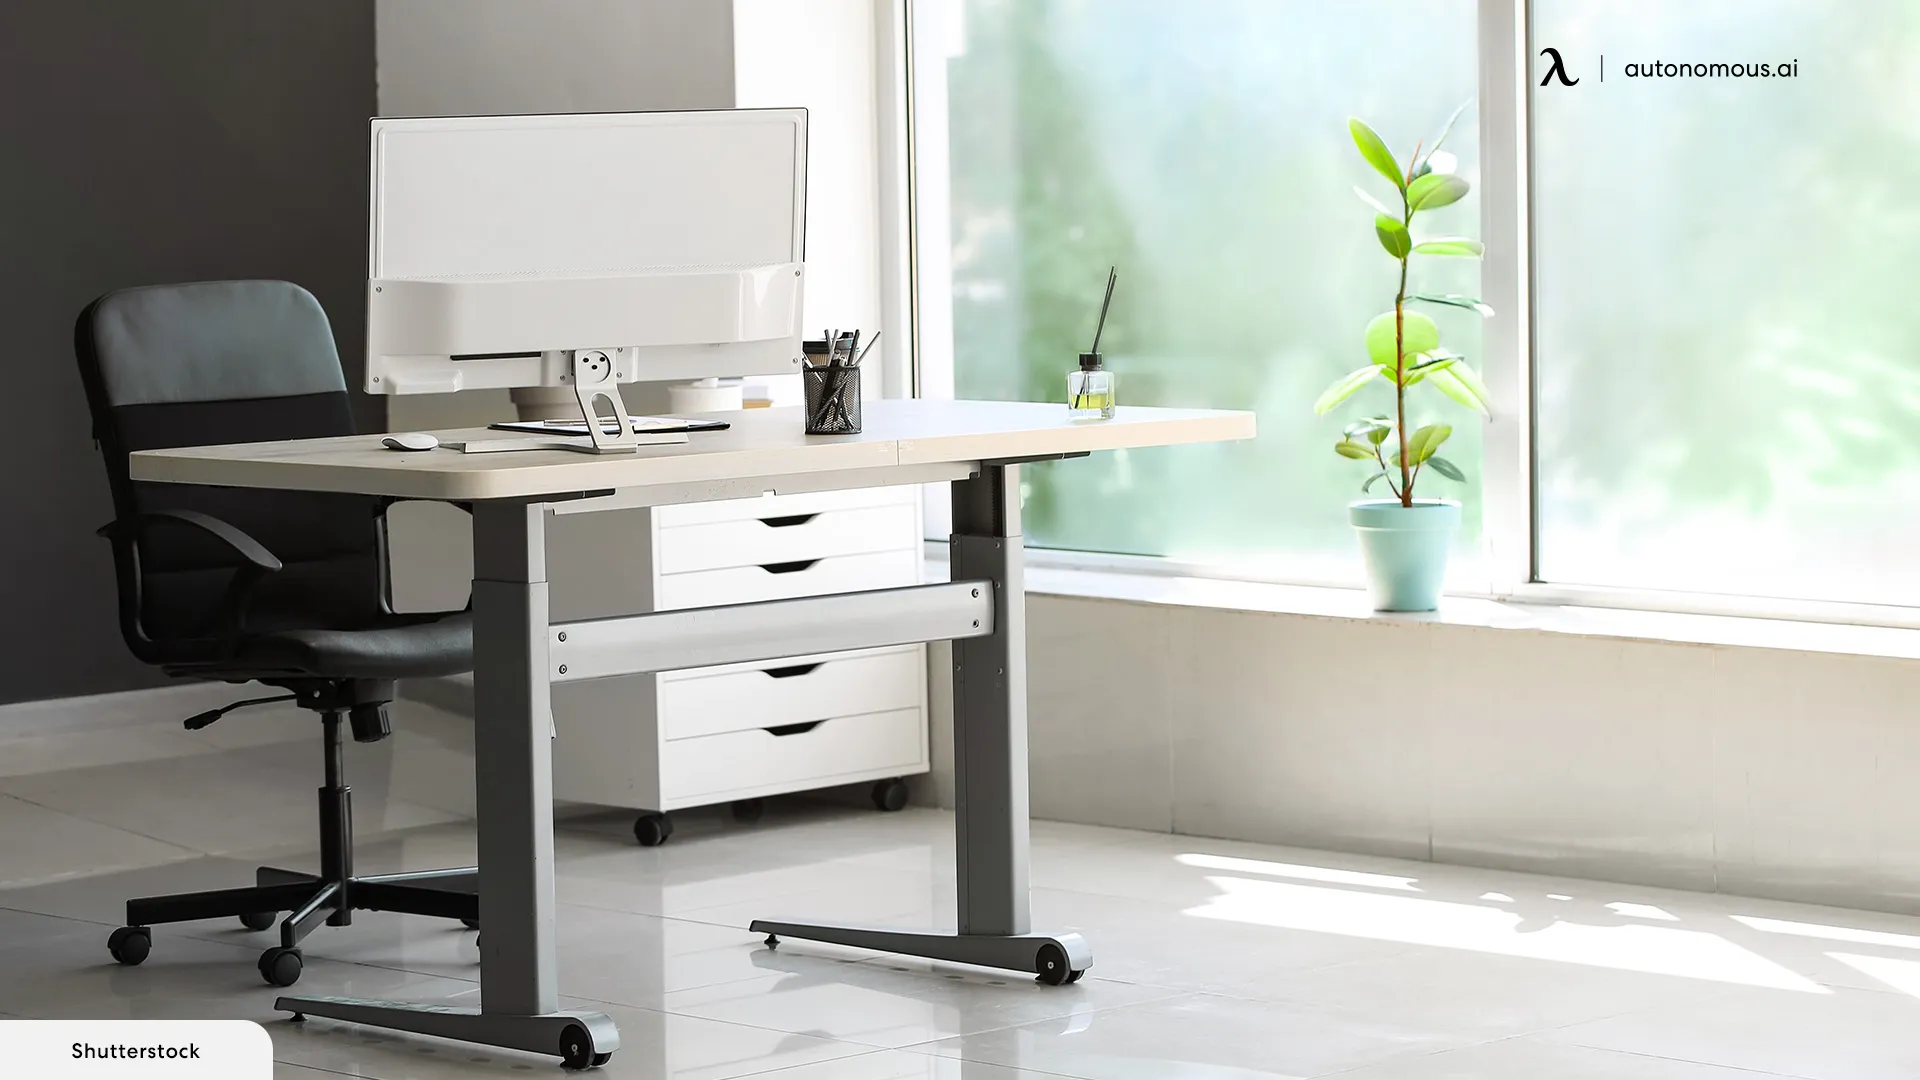 What Are the Benefits of an Adjustable Standing Desk tabletop?